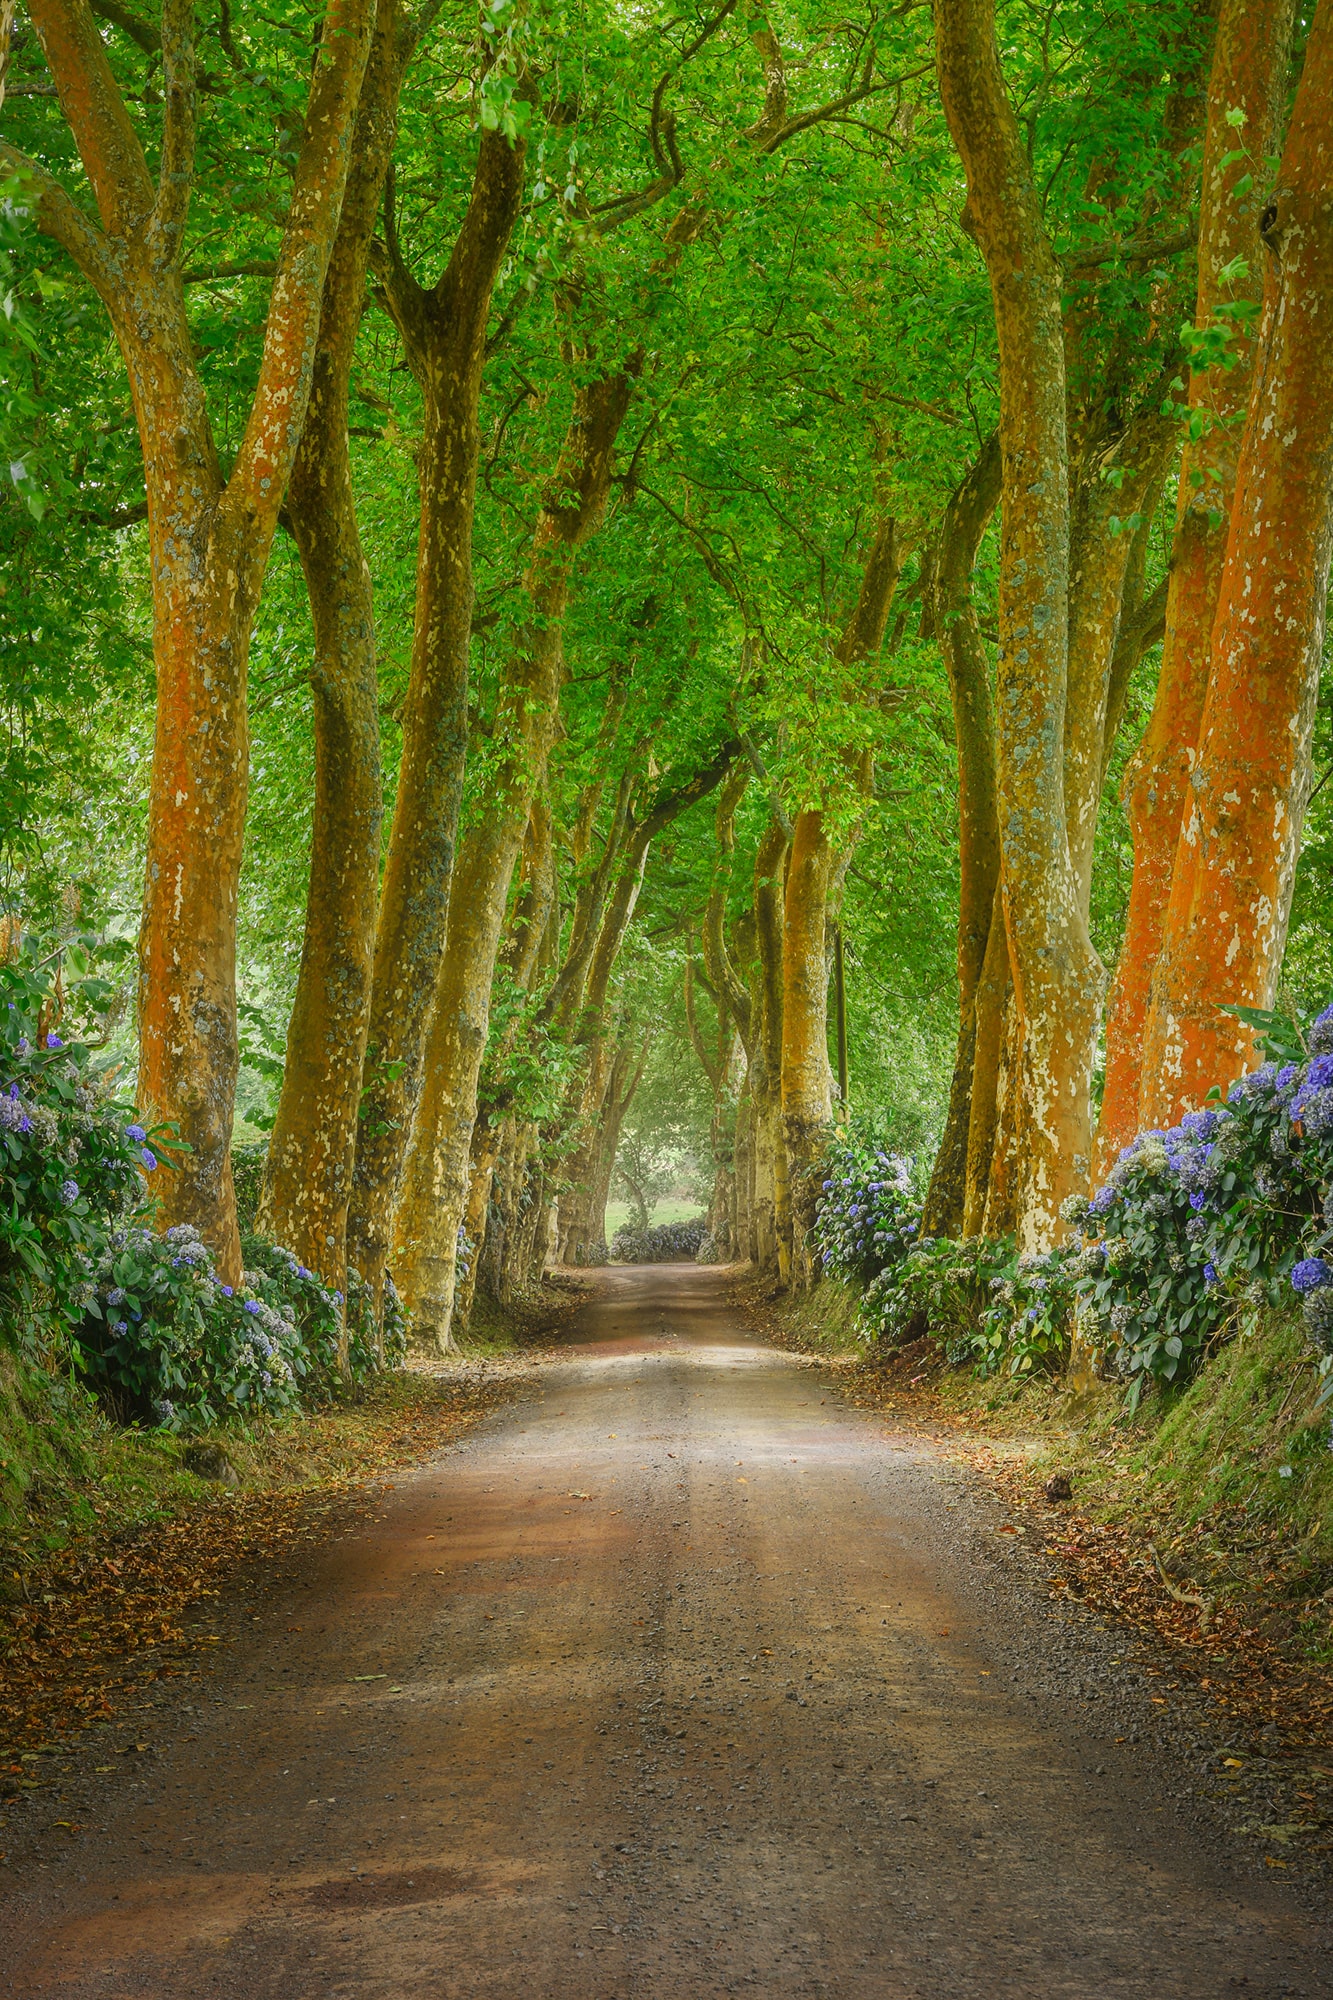 Experience the serene beauty of Alameda dos Plátanos forest in São Miguel, Azores, through the lens of Jennifer Esseiva and her Nikon D810. This forest landscape photography showcases the lush, luxurious trees that line the path, creating a captivating canopy of greenery. Immerse yourself in the tranquility of the Azorean forest as you wander through this enchanting landscape. Join Esseiva on this visual journey through São Miguel's natural wonders, where every frame captures the timeless charm and serene beauty of the Azores.